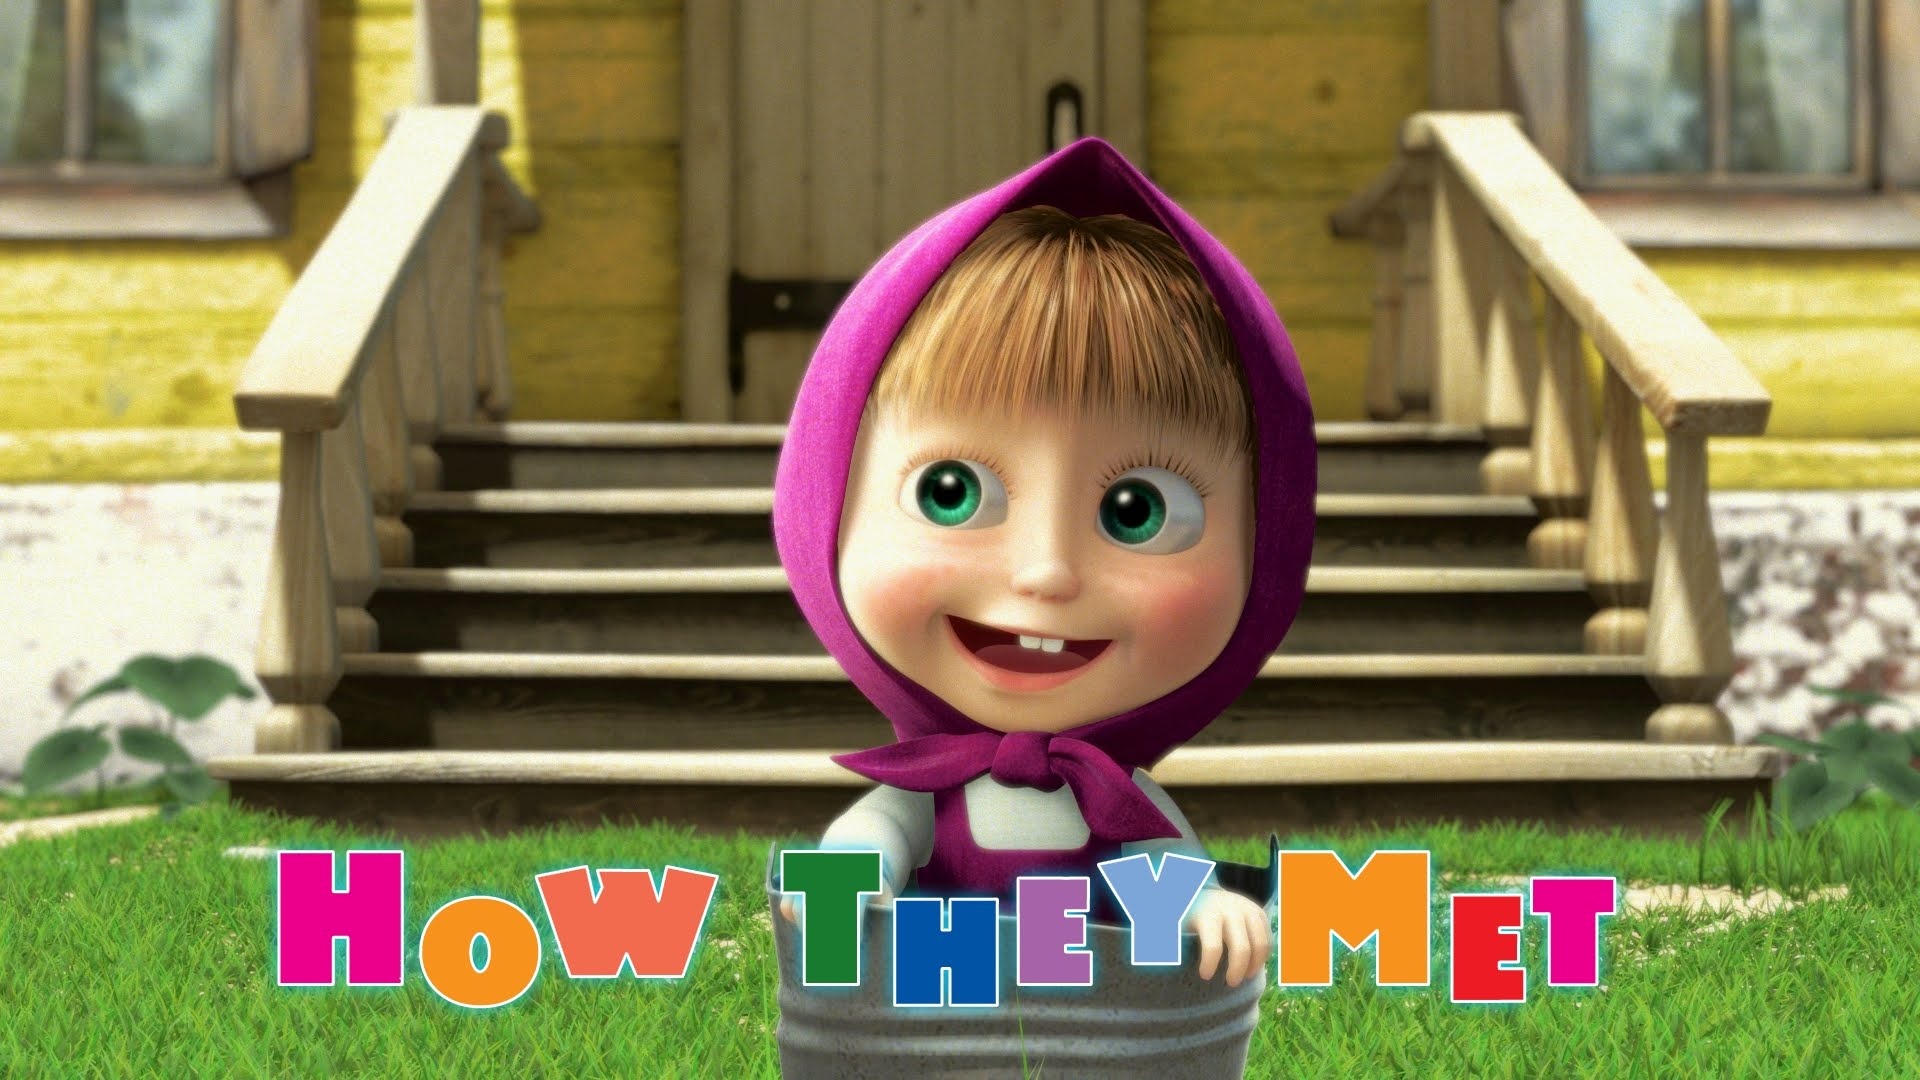 Masha and the Bear, Best episodes, Funny and heartwarming, Cartoon highlights, 1920x1080 Full HD Desktop